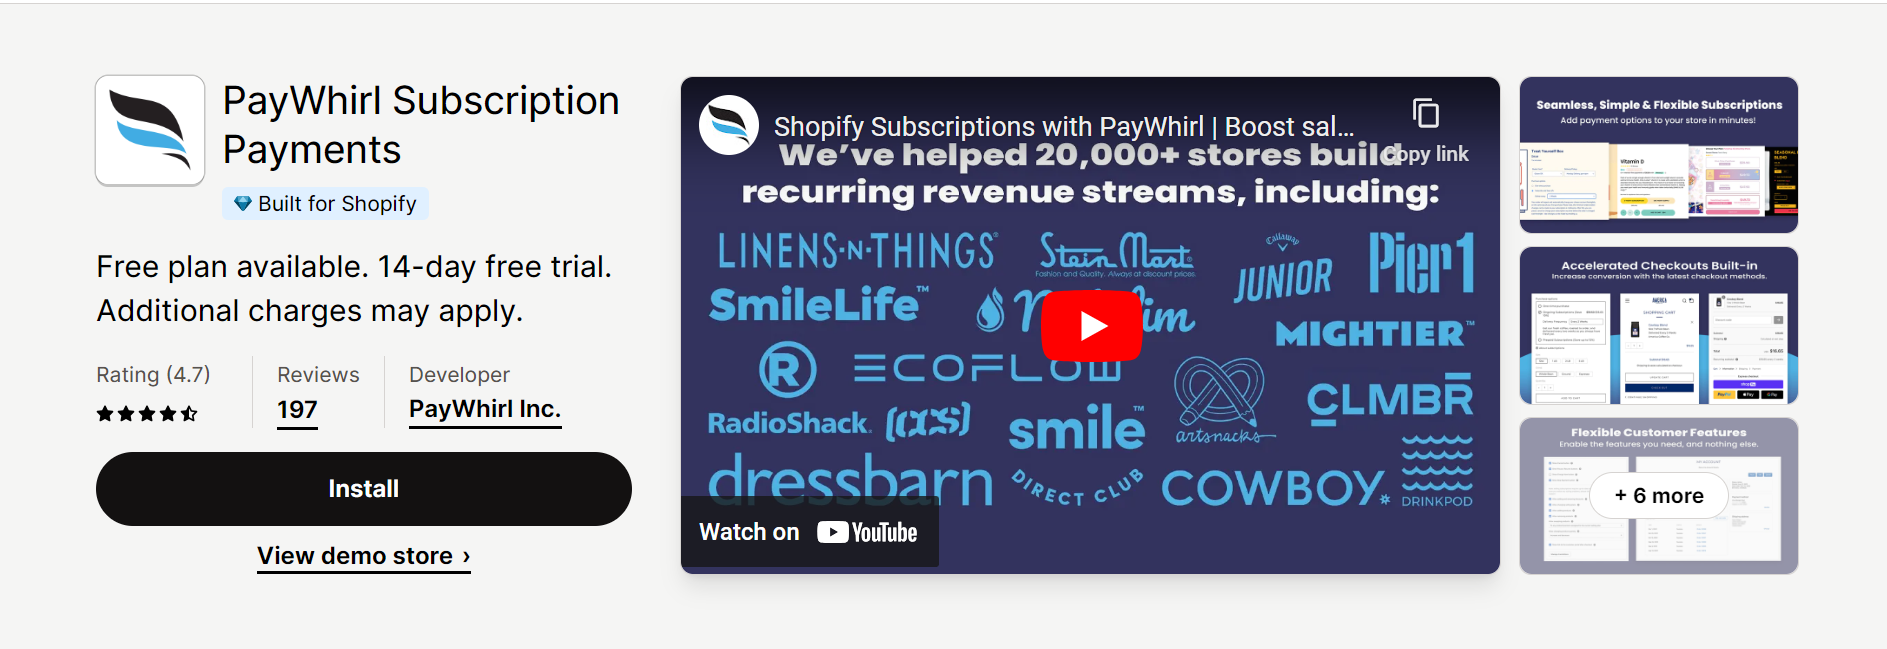 PayWhirl Subscription